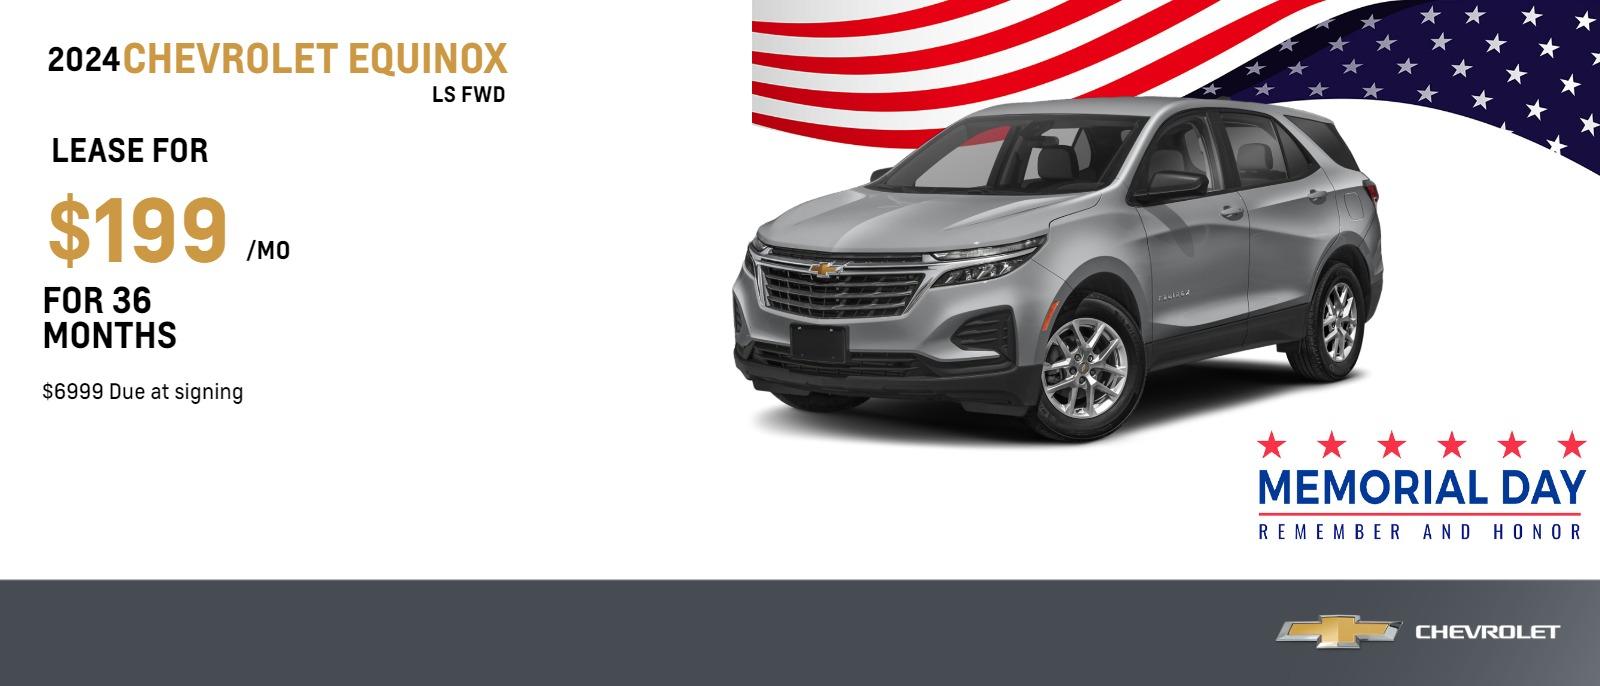 2024 Chevrolet Equinox LS FWD
$199 Month Lease | 36 Months | $6999 Due at signing